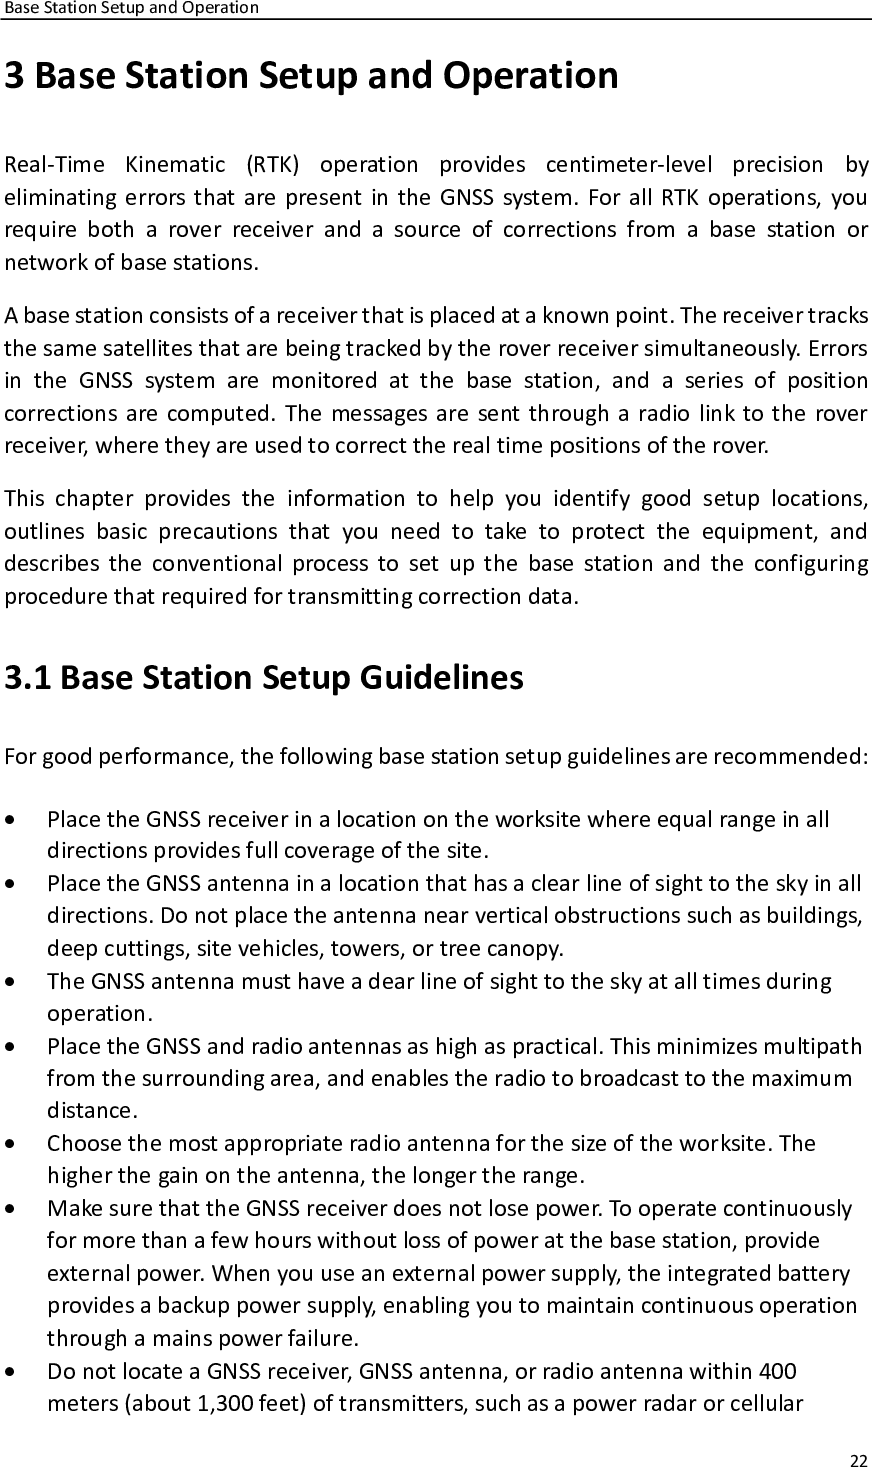 Page 23 of Huace Navigation Technology A01013 Geodetic GNSS Receiver E91 User Manual User manual